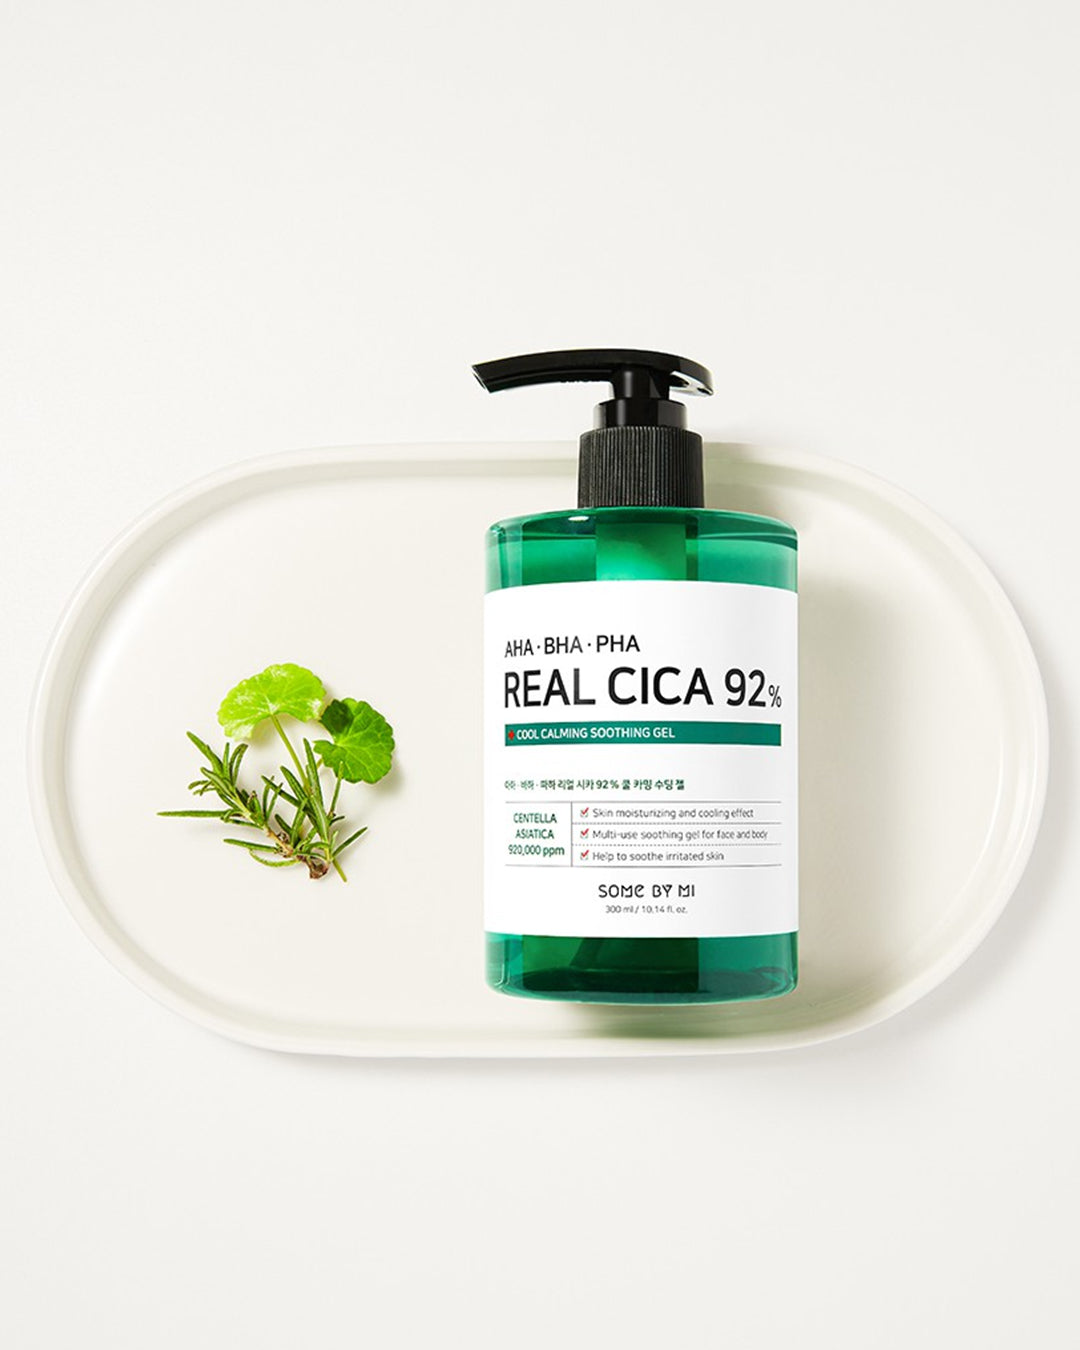 Some-By-Mi-AHA-BHA-PHA-Real-Cica-92%-Cool-Calming-Soothing-Gel-k-beauty-colombia-cosmetica-coreana2